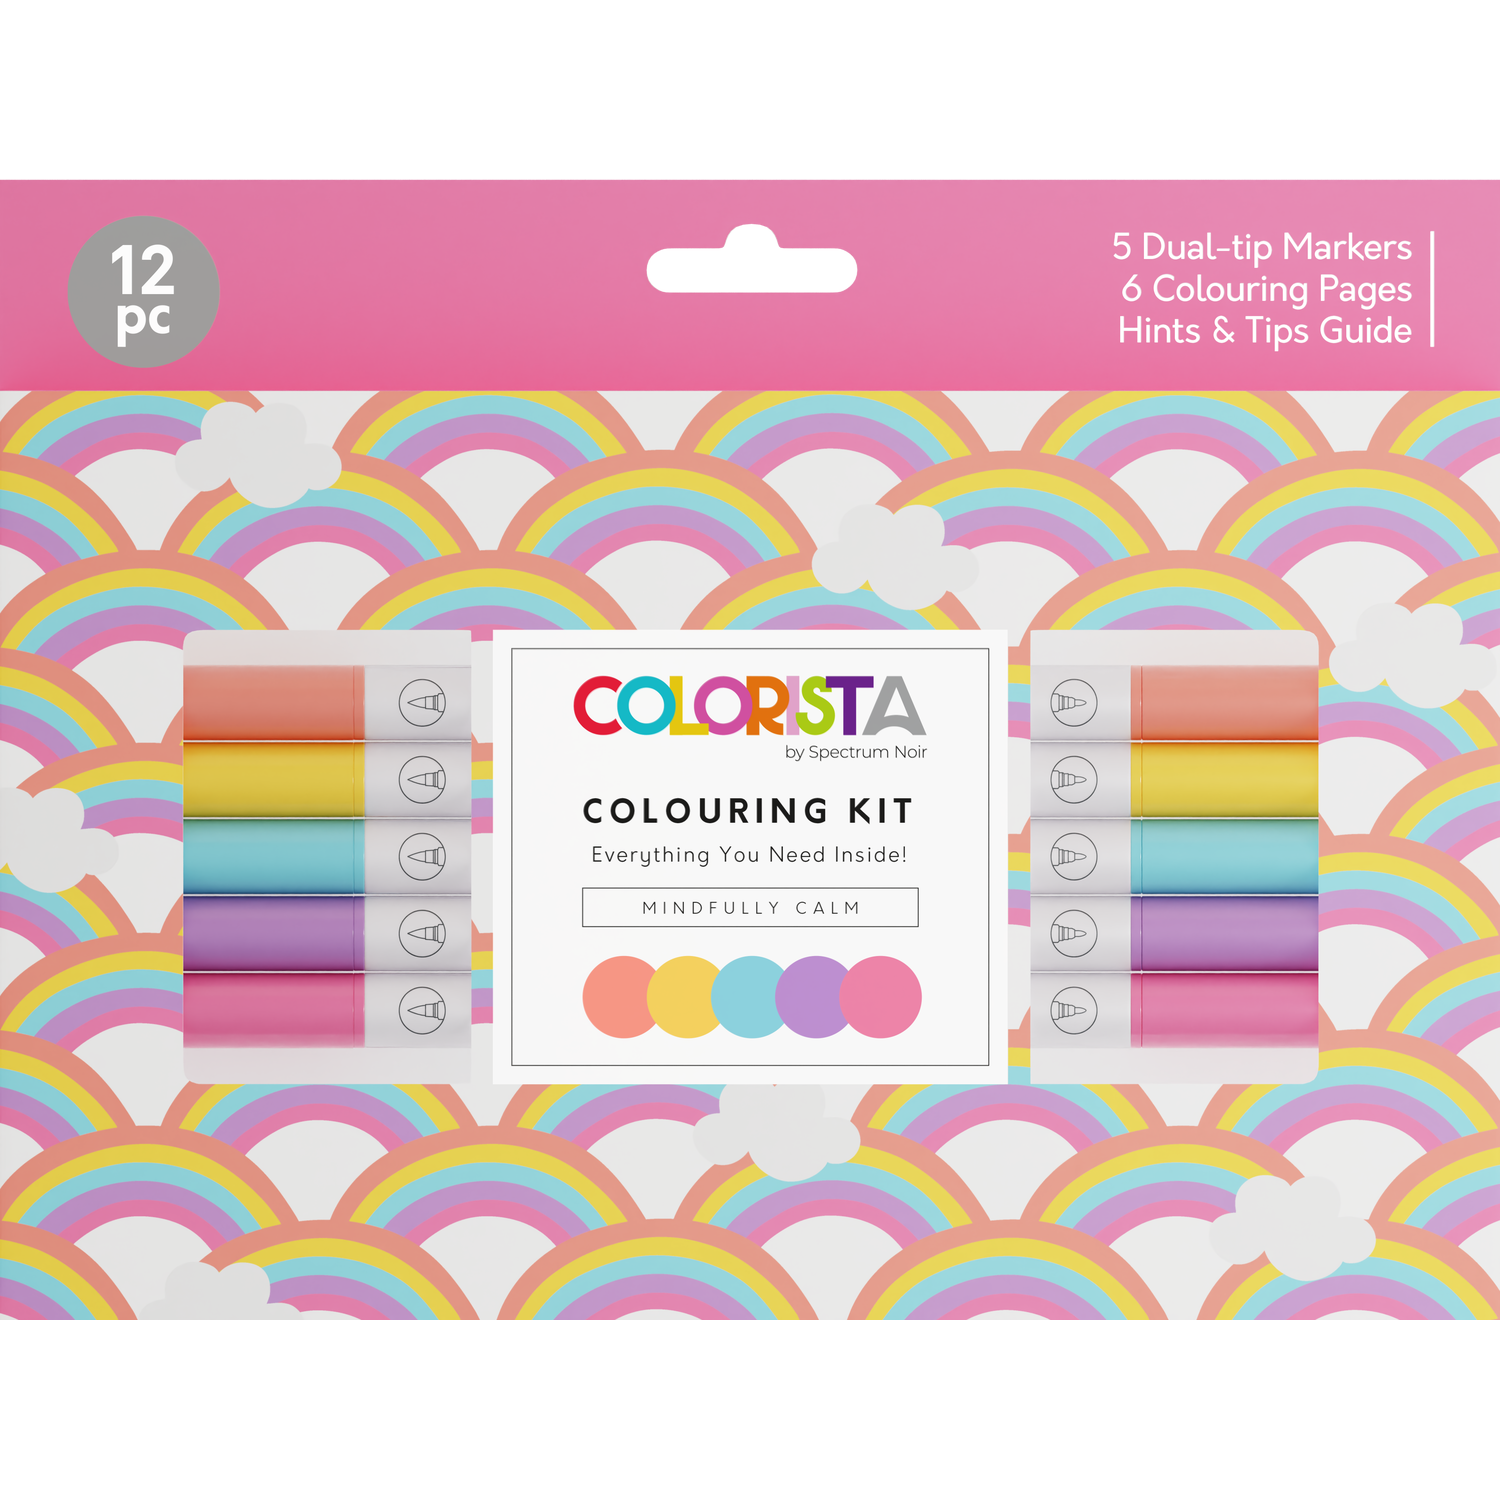 Colorista Colouring Kit - Mindfully Calm Image 1